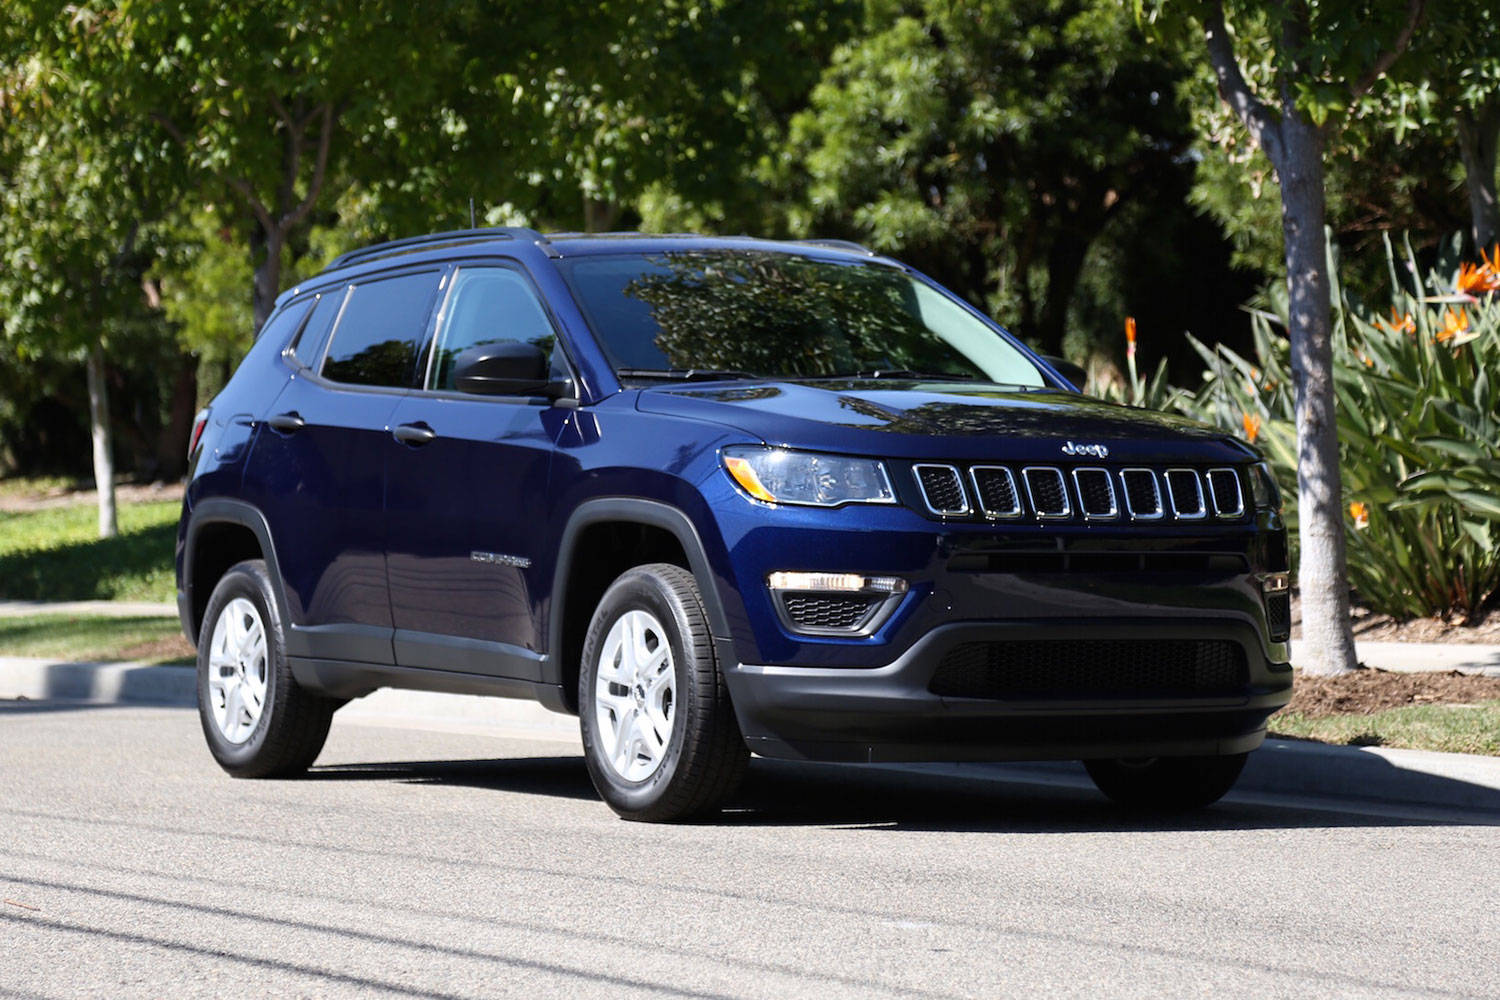 Jeep Compass Dark Blue On Road Picture